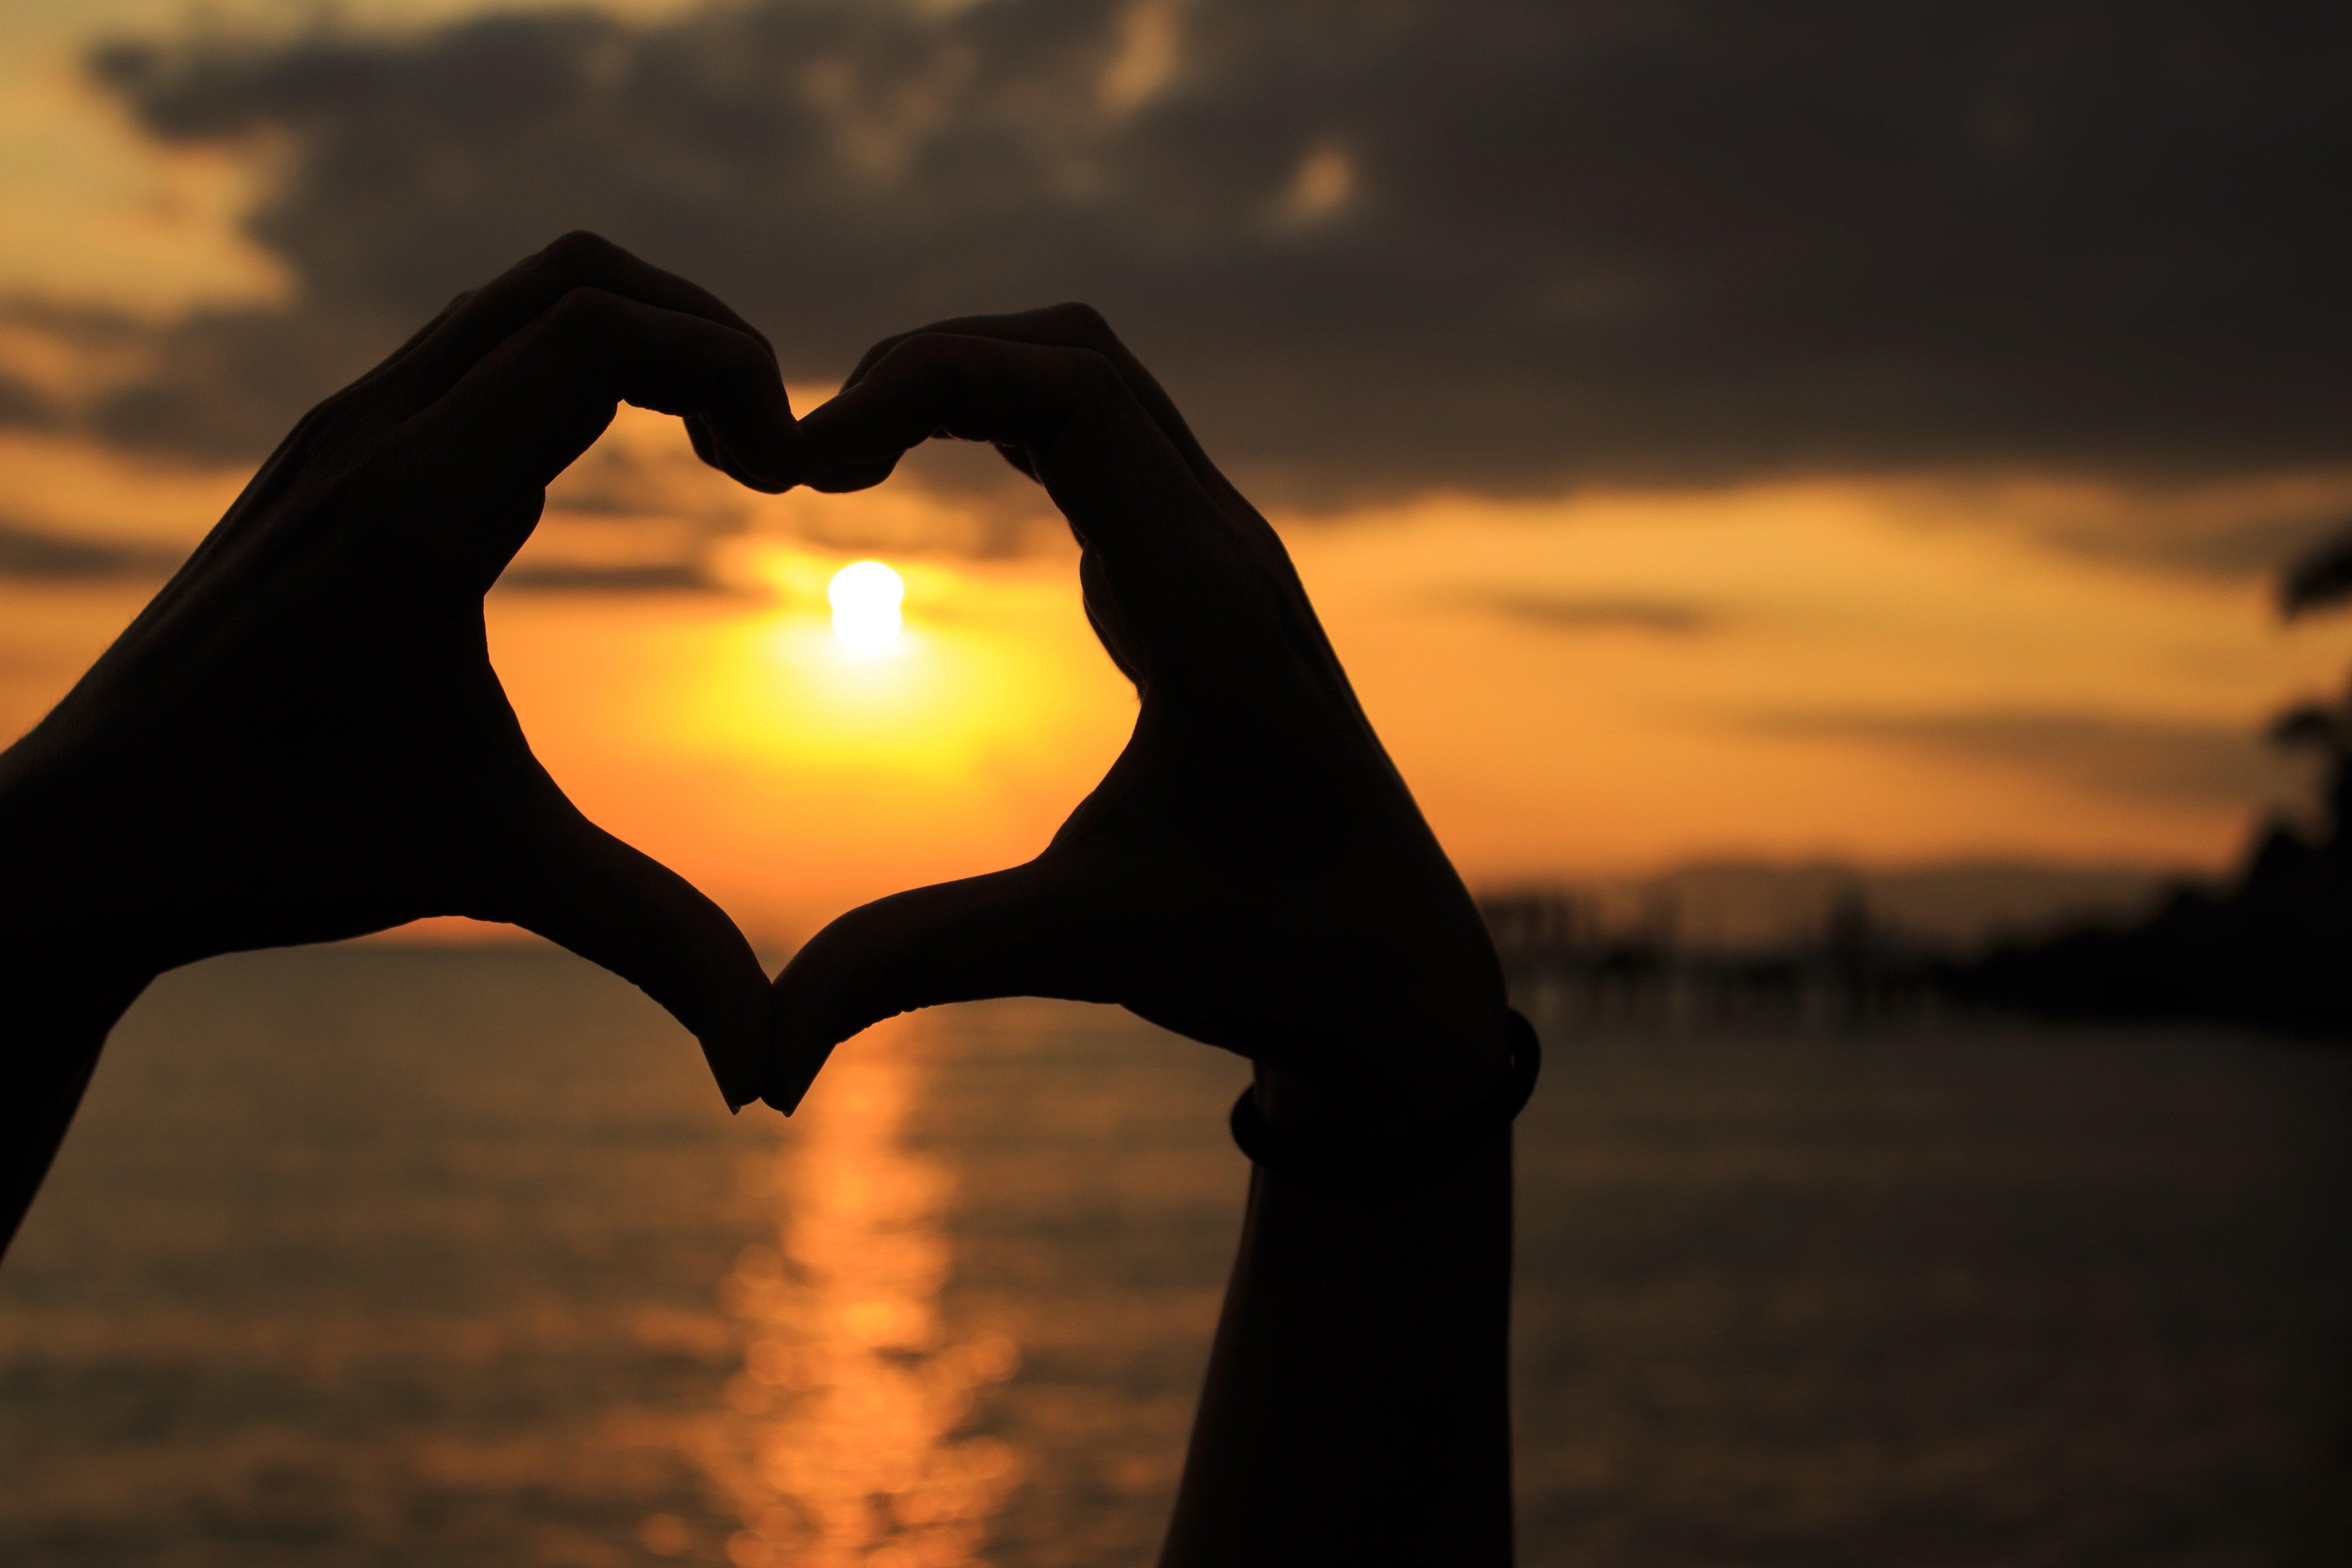 silhouette of person forming heart sign using hands during golden hour